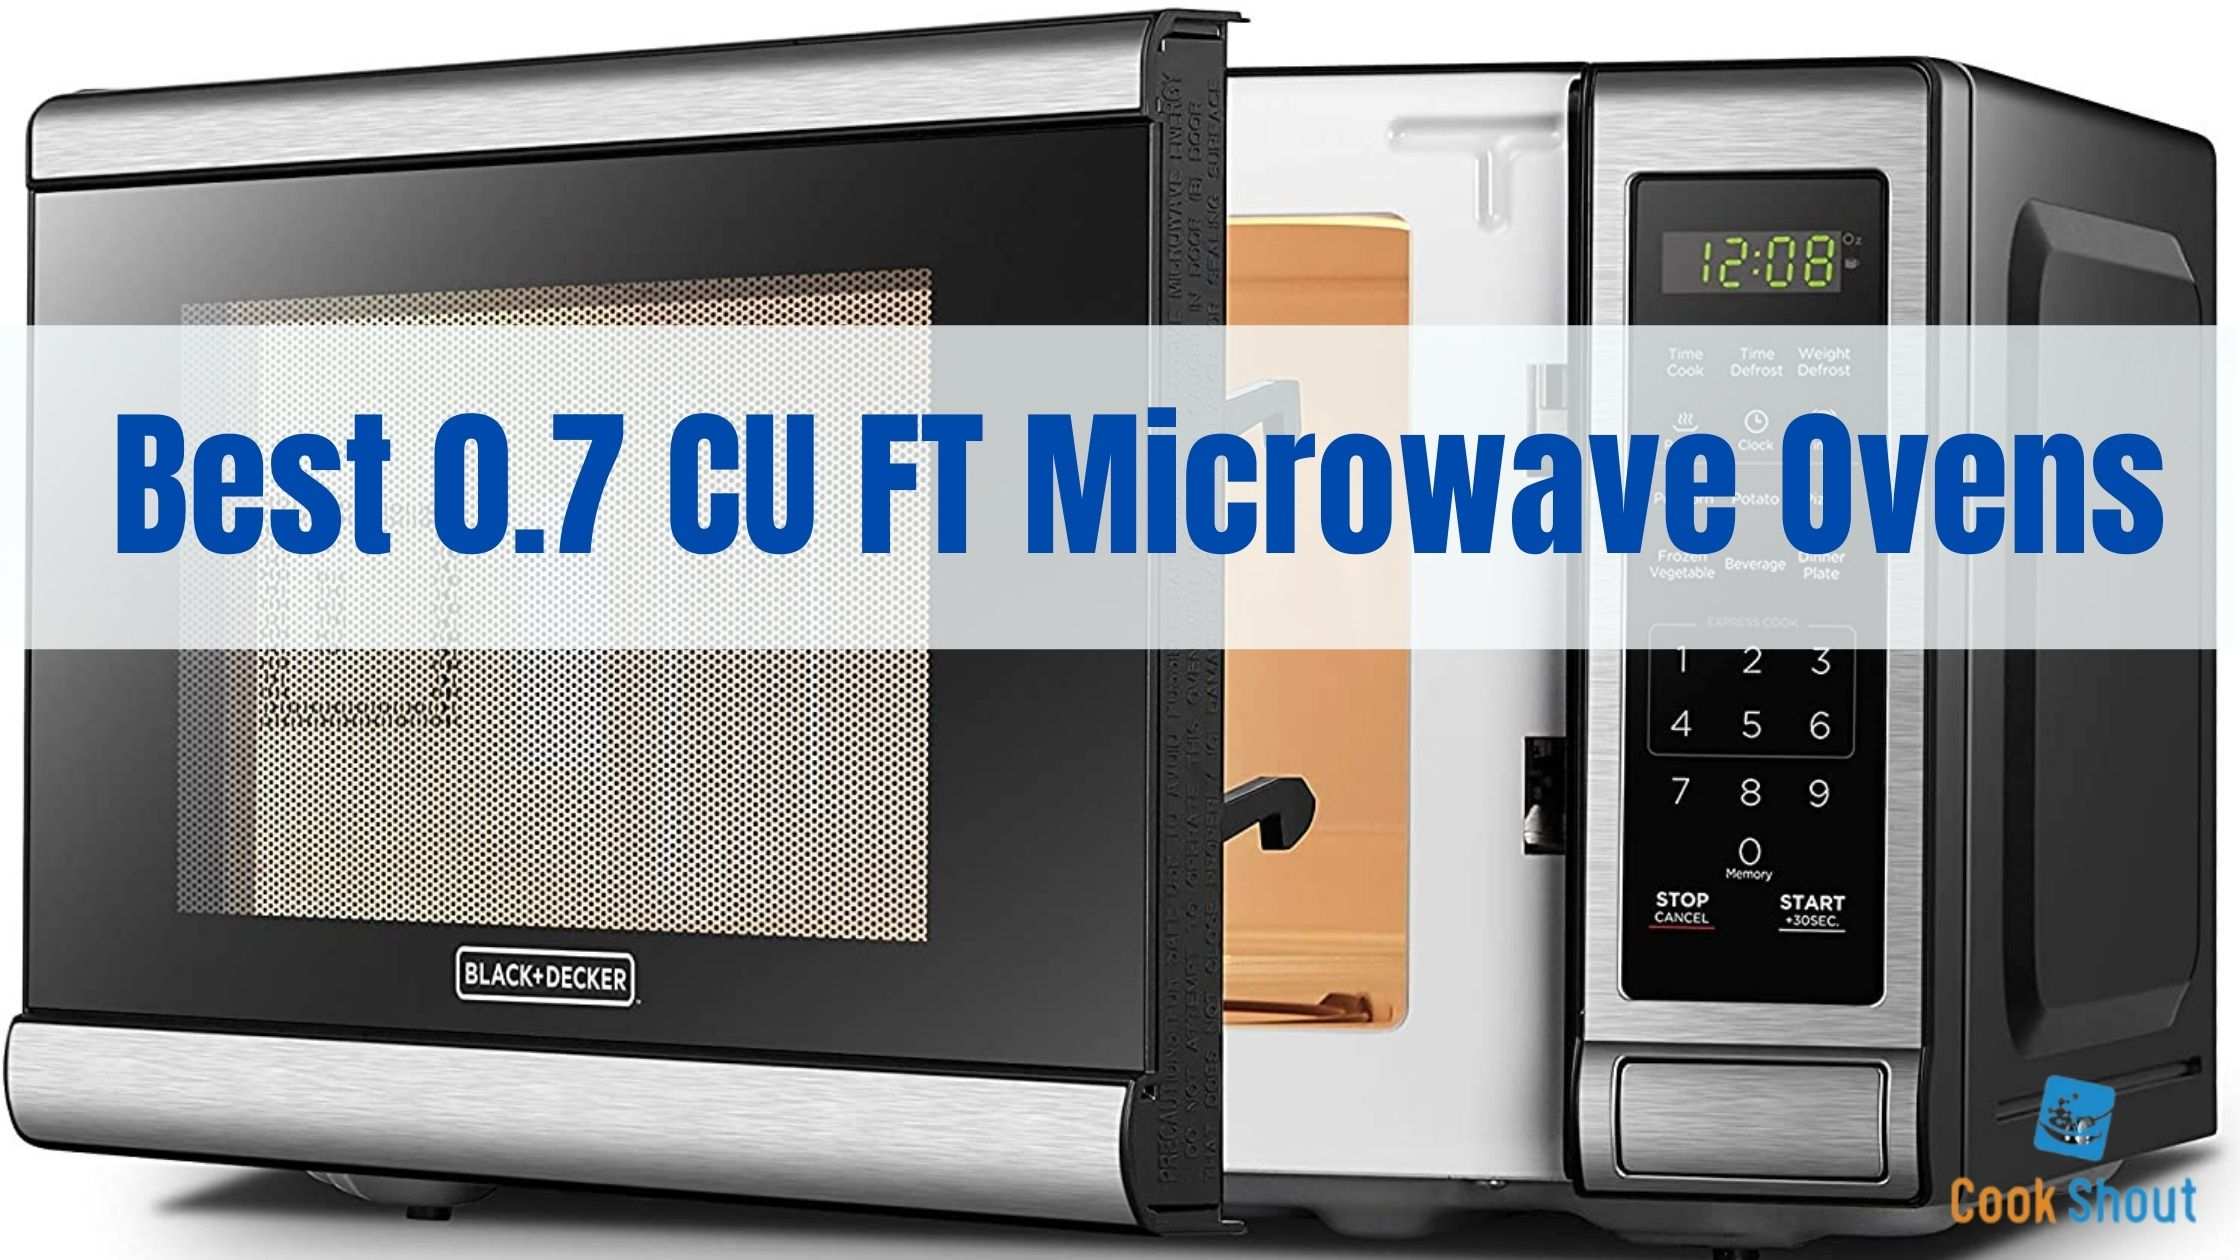 Best 0.7 CU FT Microwave Ovens 2021